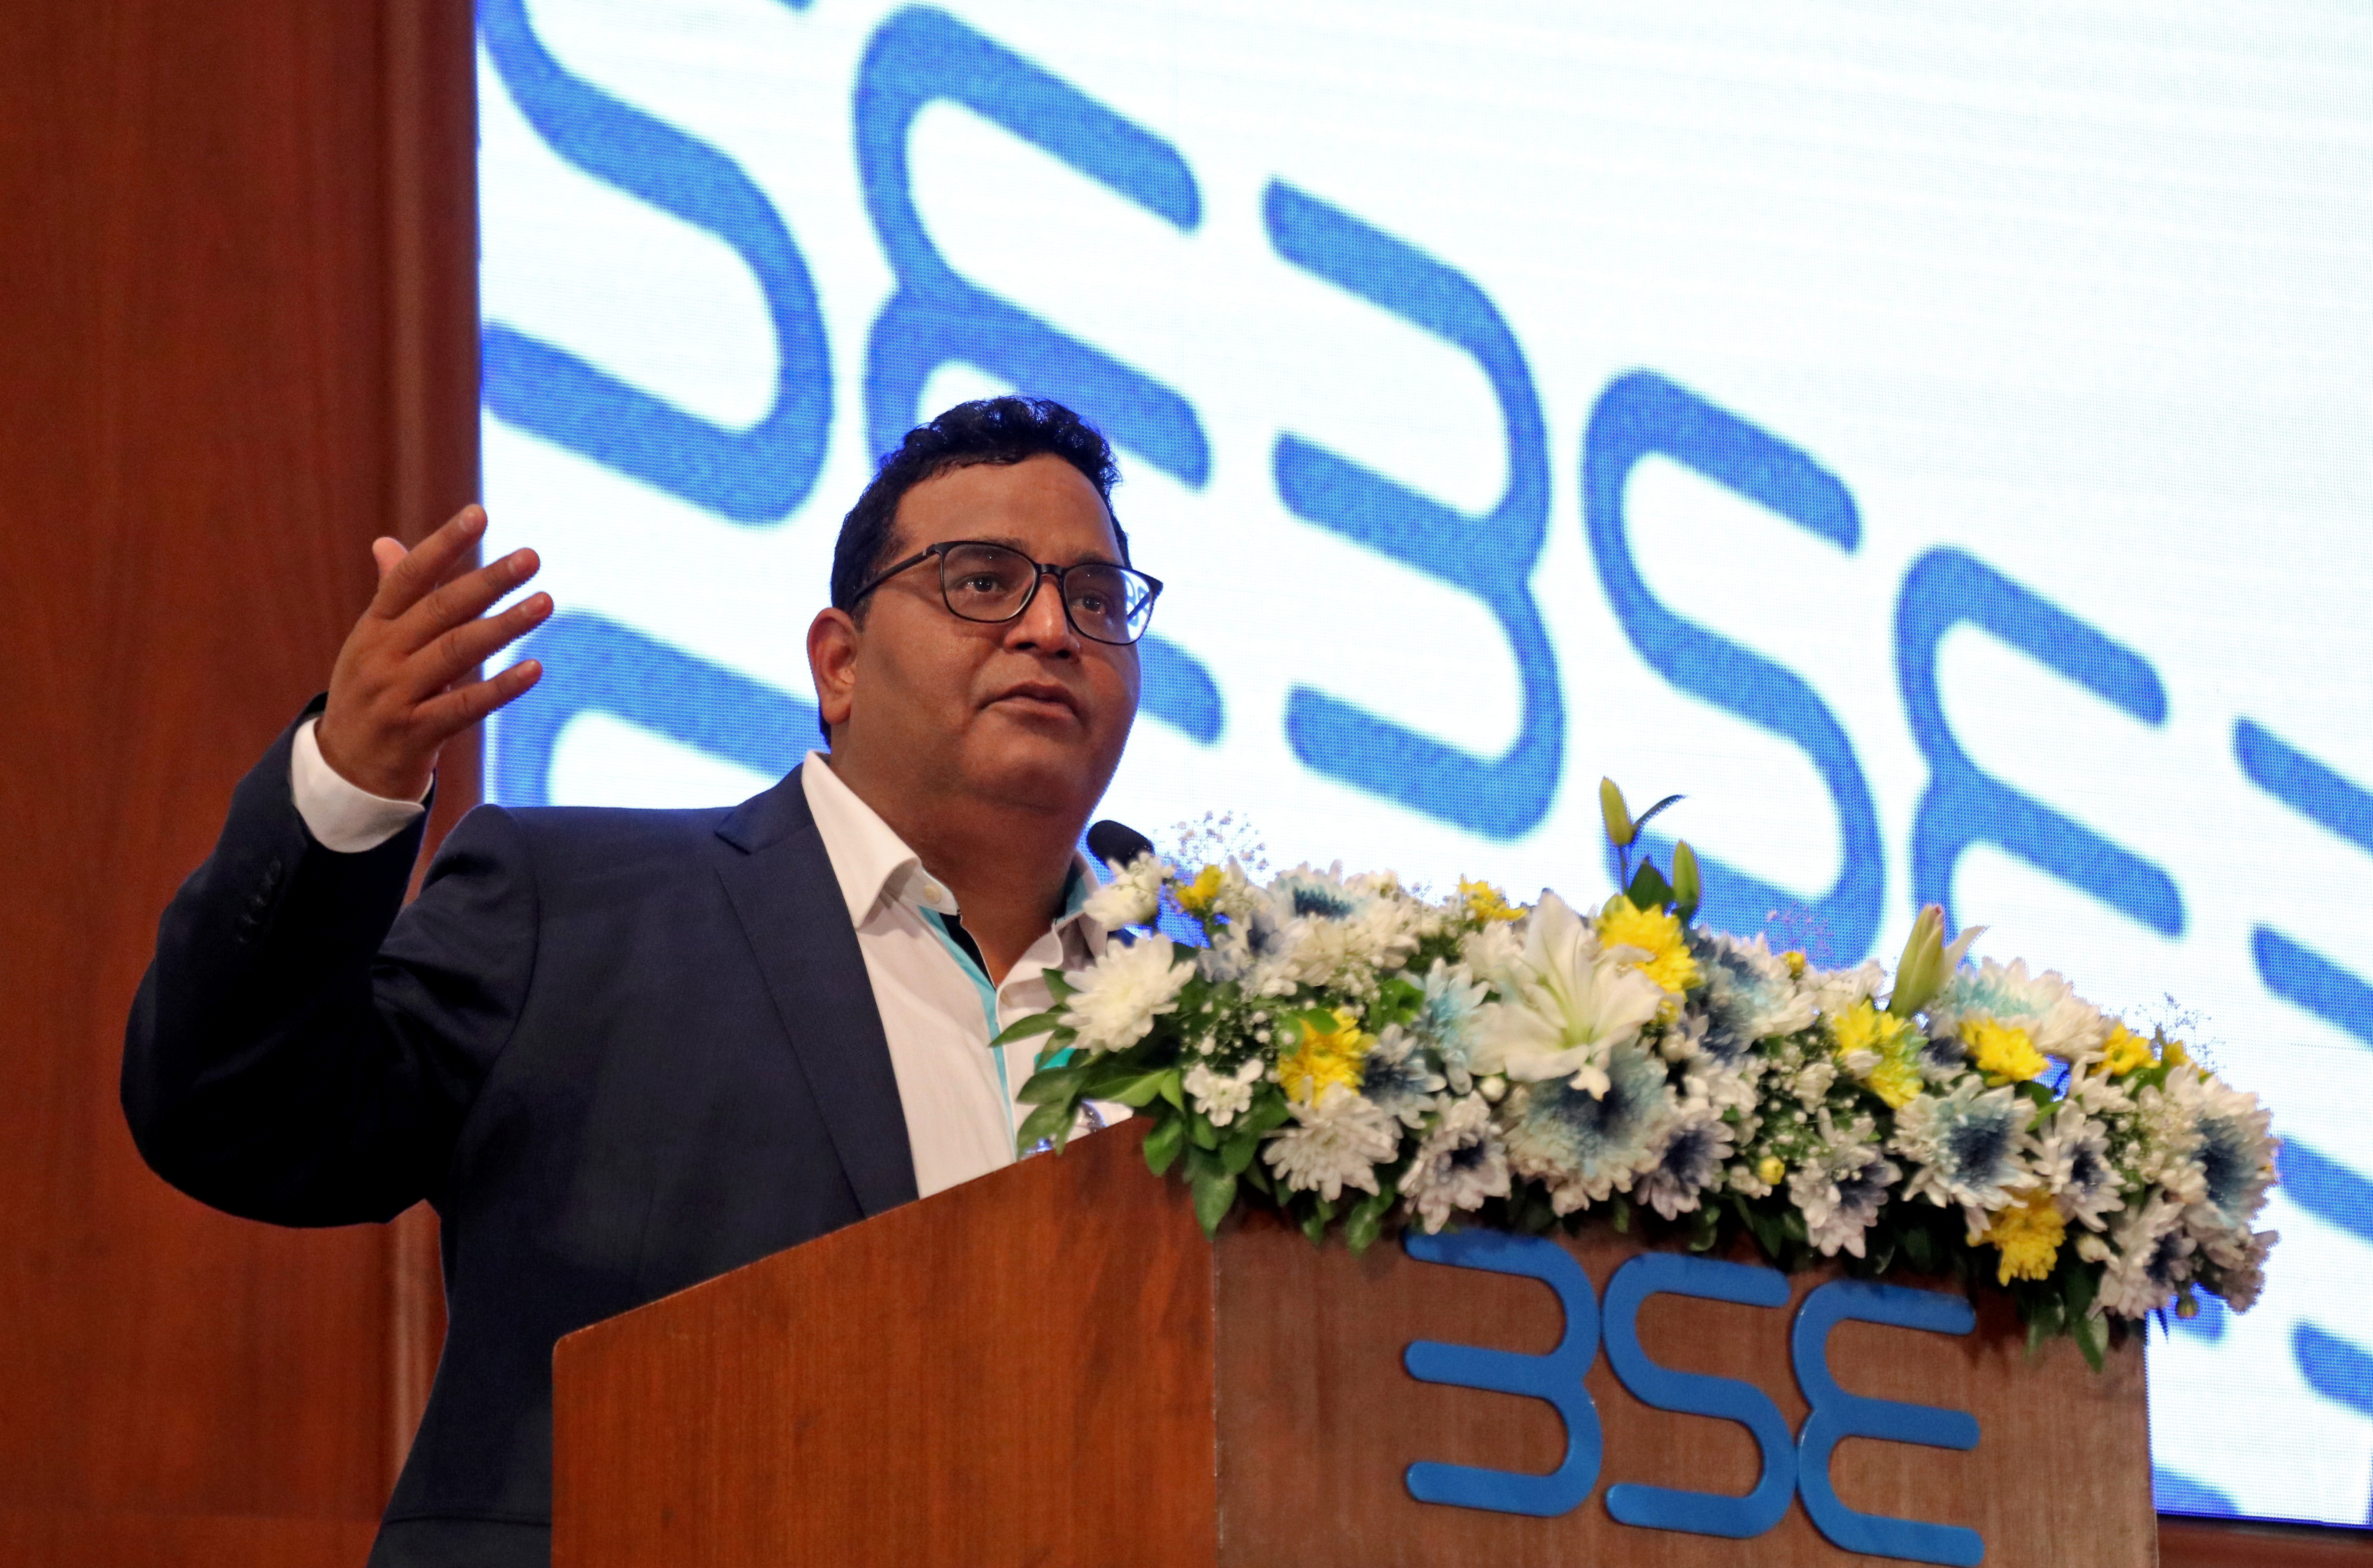 Paytm founder and CEO Vijay Shekhar Sharma delivers a speech during his company's IPO listing ceremony at the Bombay Stock Exchange in Mumbai